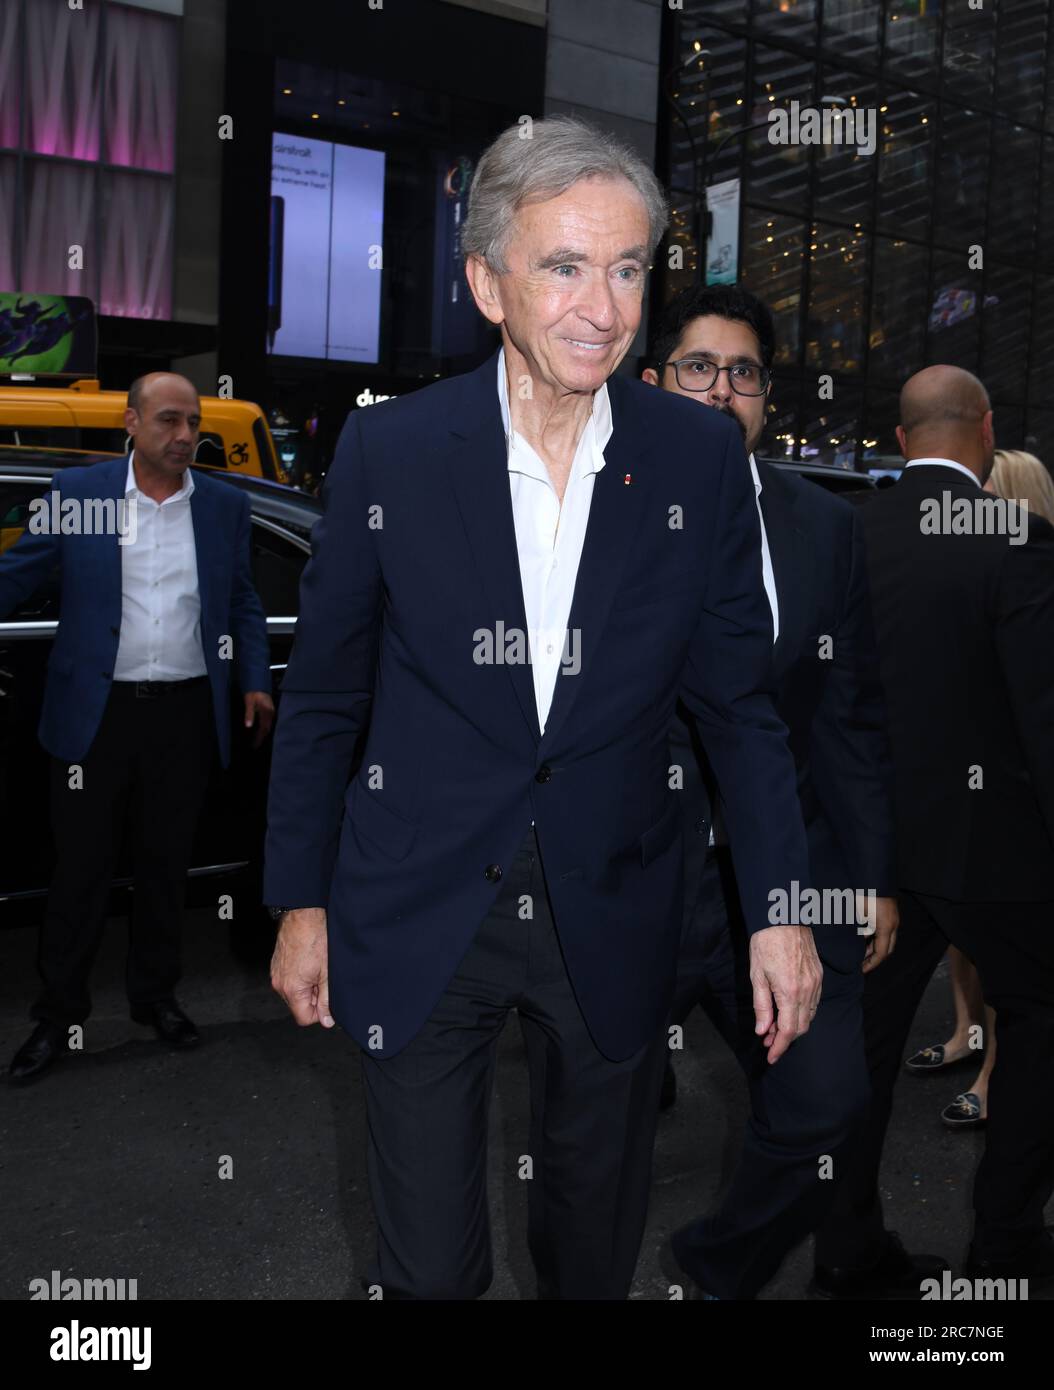 Karl lagerfeld and bernard arnault hi-res stock photography and images -  Alamy